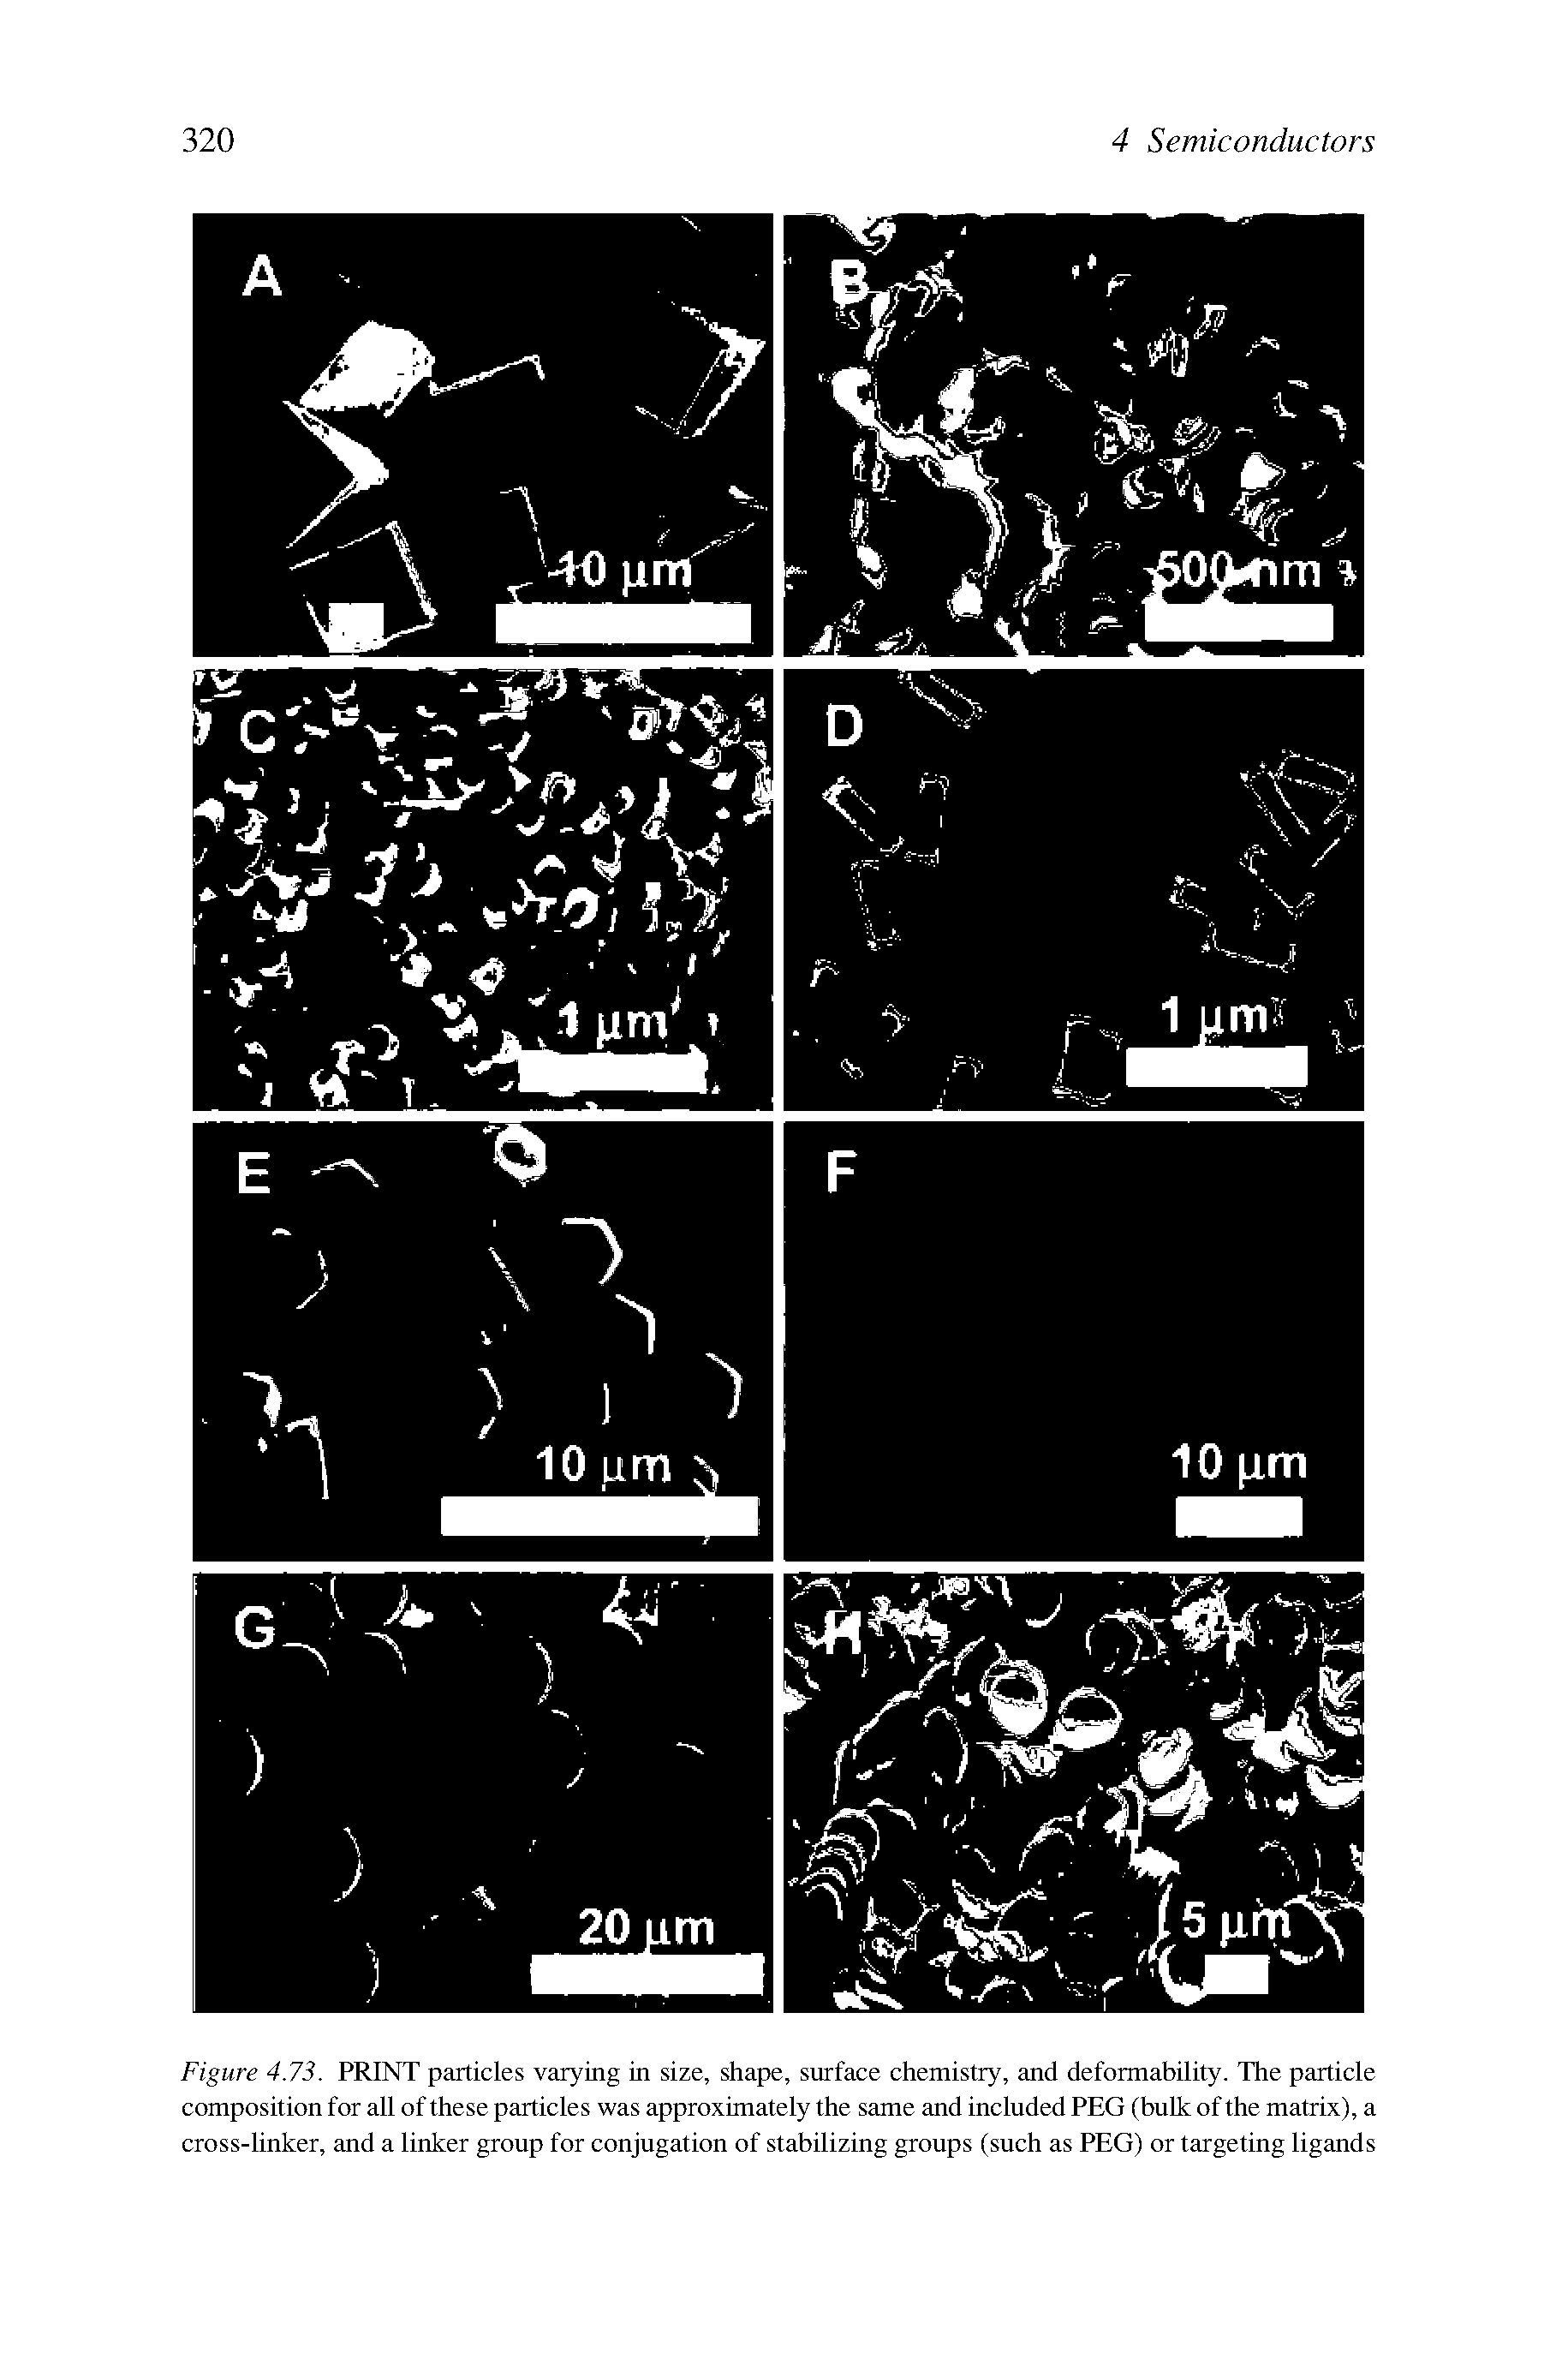 Figure 4.73. PRINT particles varying in size, shape, surface chemistry, and deformability. The particle composition for all of these particles was approximately the same and included PEG (bulk of the matrix), a cross-linker, and a linker group for conjugation of stabilizing groups (such as PEG) or targeting ligands...